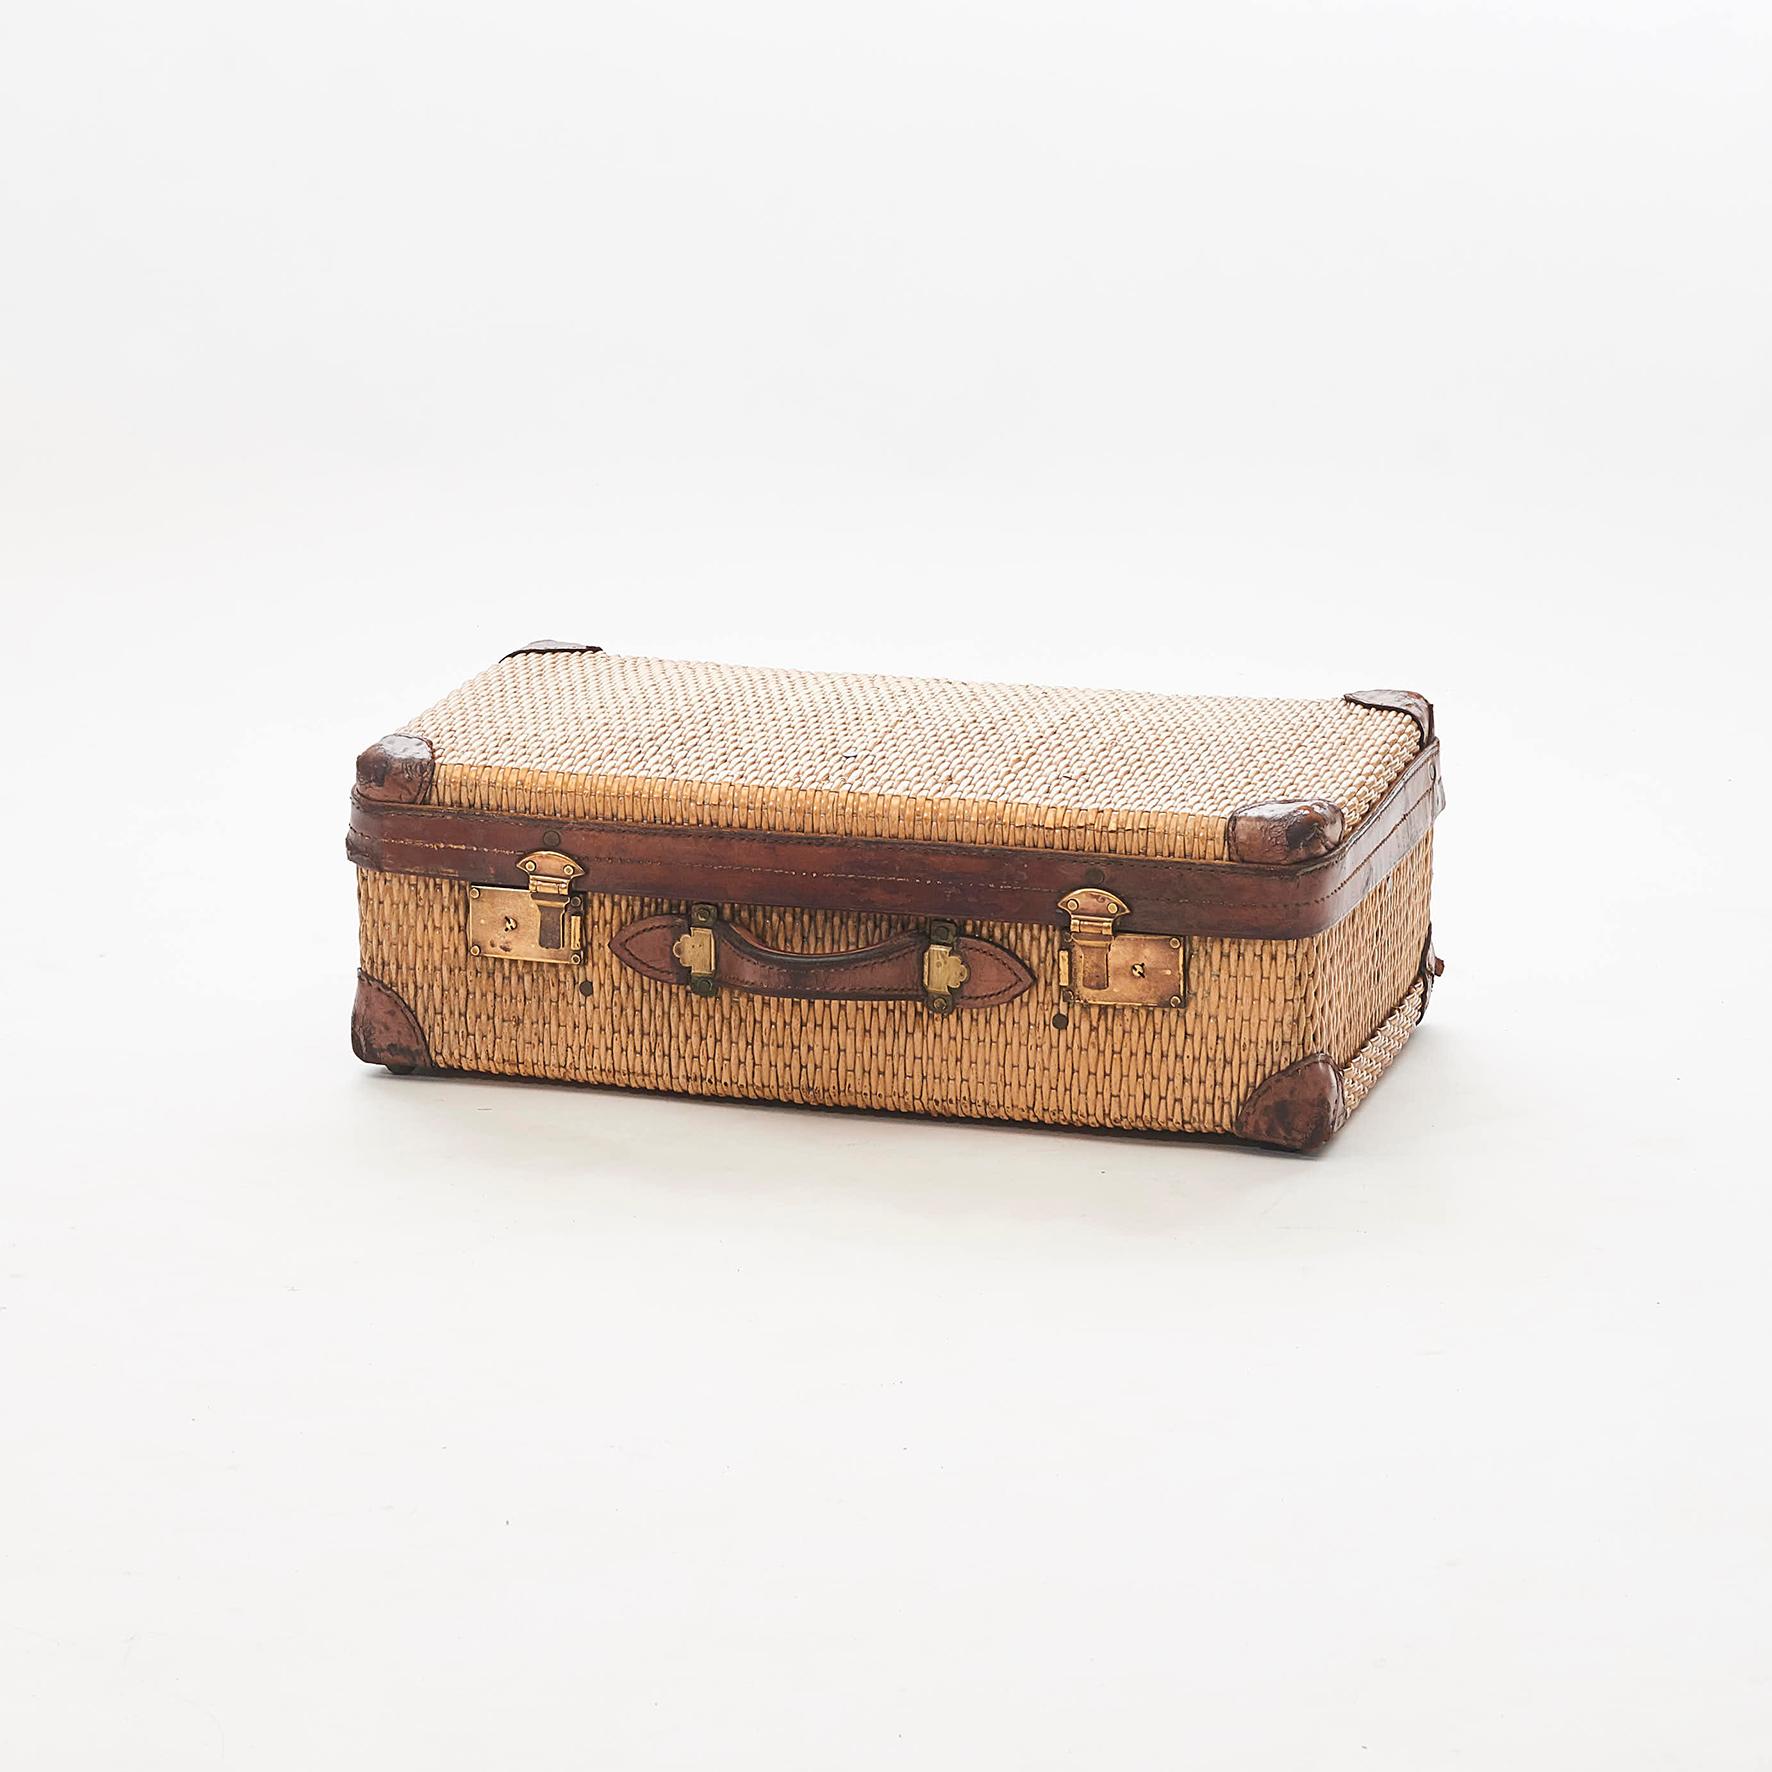 Very charming travel case in woven cane with leather and brass lock fittings. England, circa 1910. Untouched condition with good and natural patina. Original cotton interior.